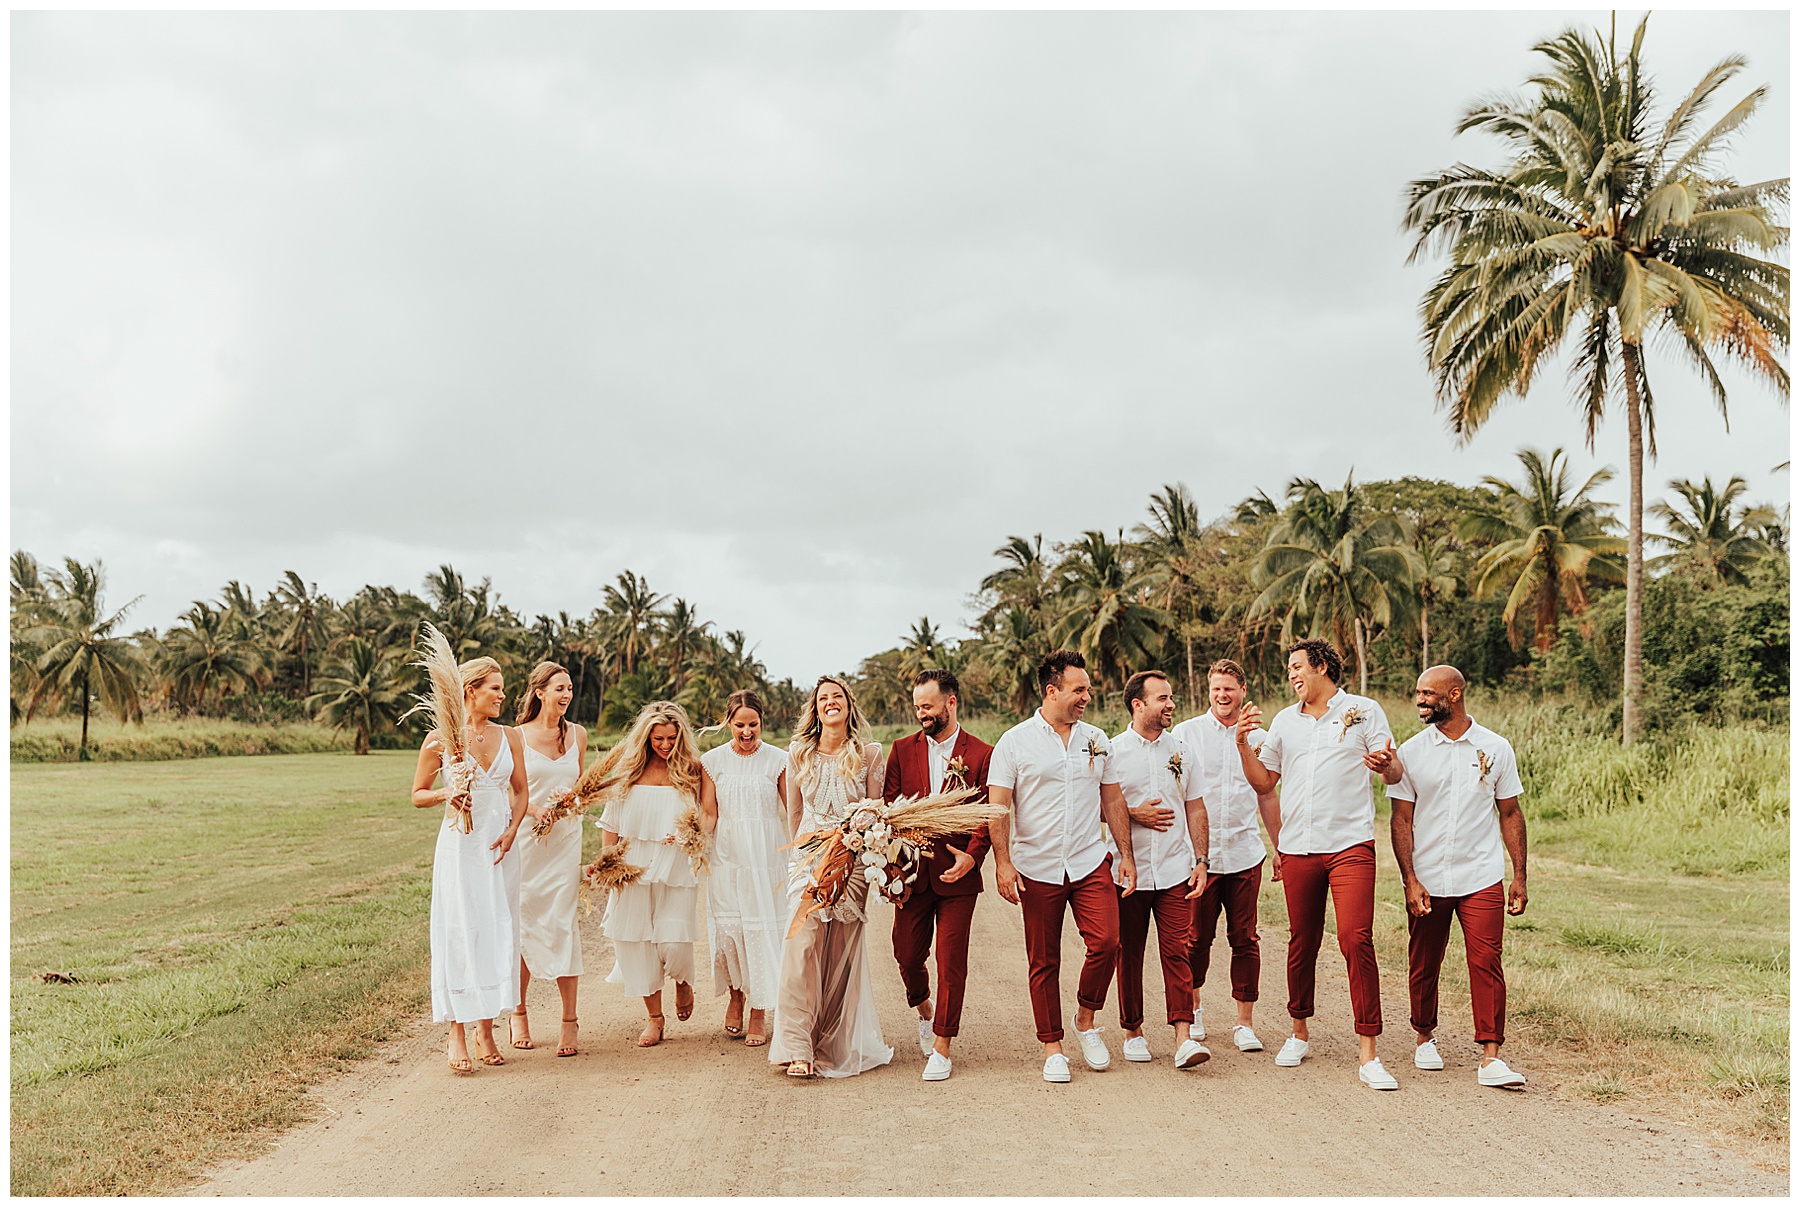 Dillingham Ranch Wedding Oahu Hawaii With Bustle Events